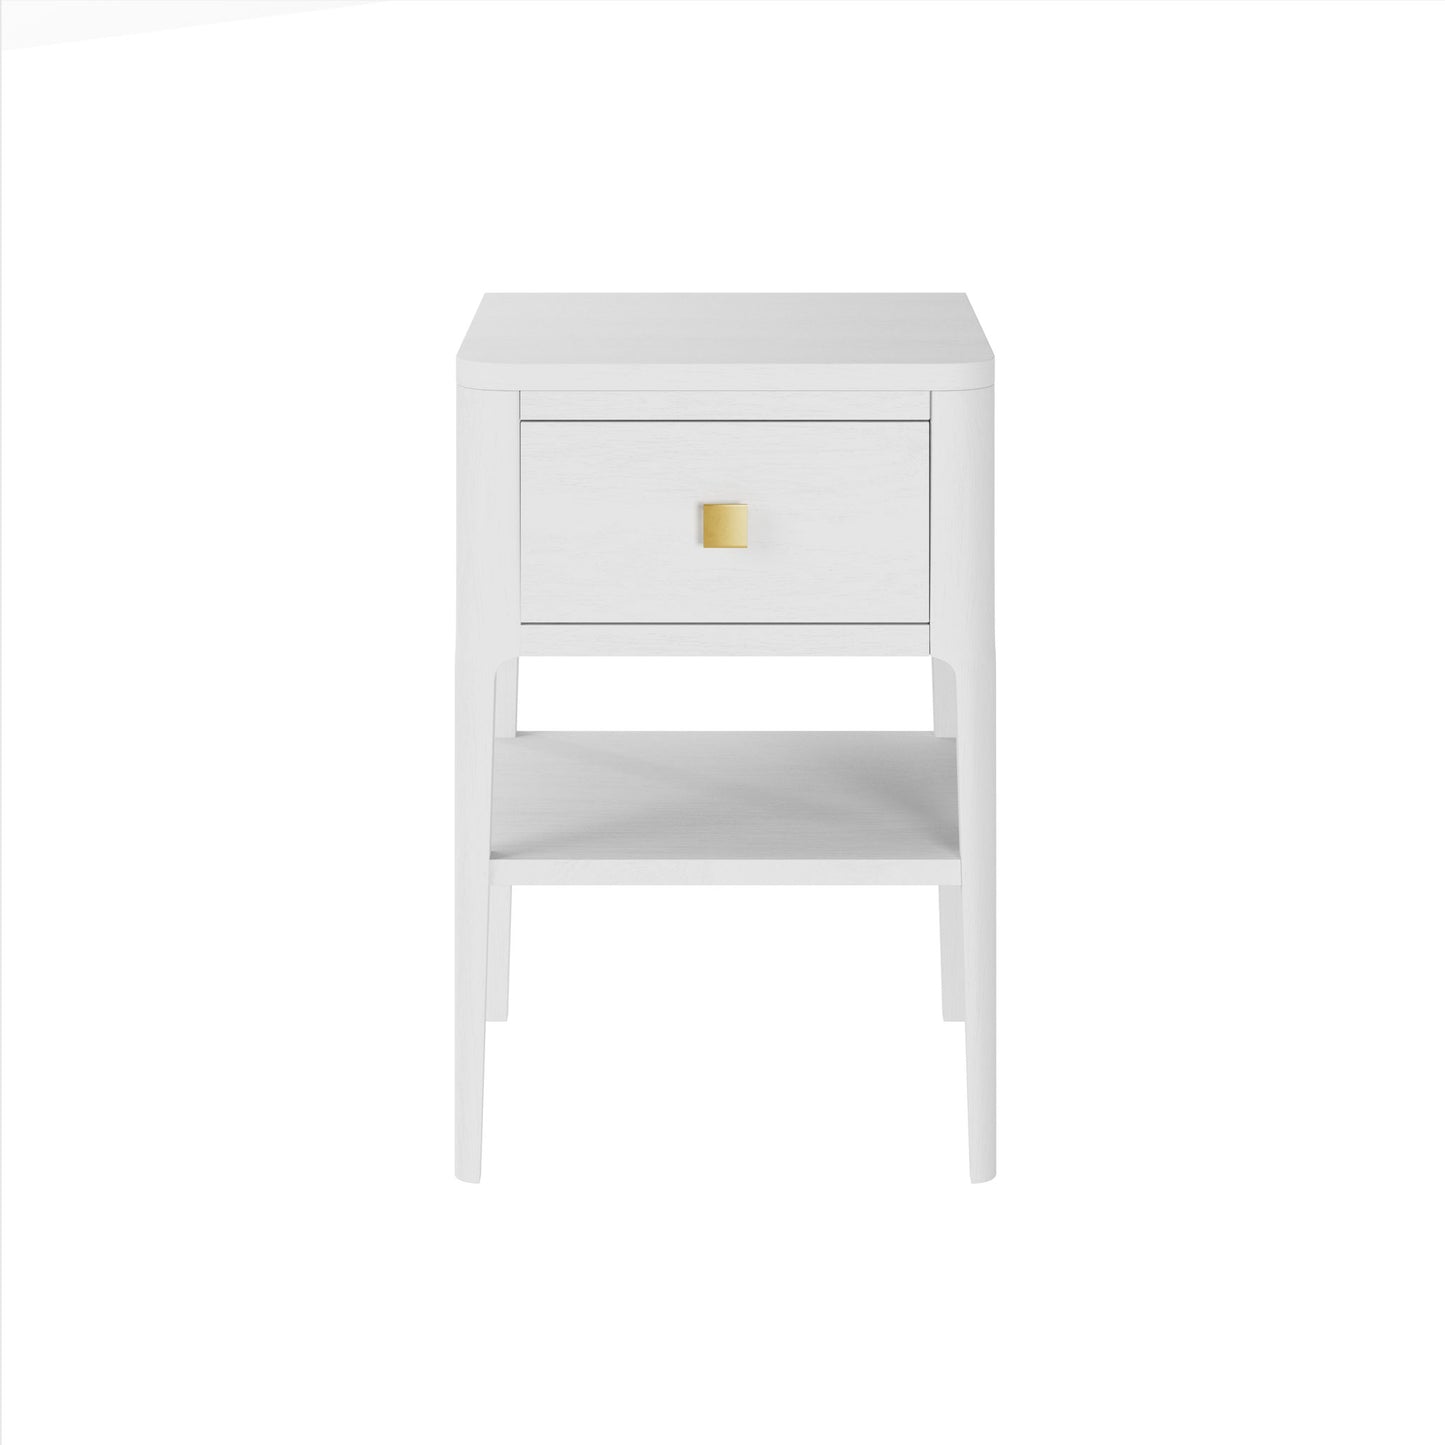 White Abberley One Drawer Bedside Table